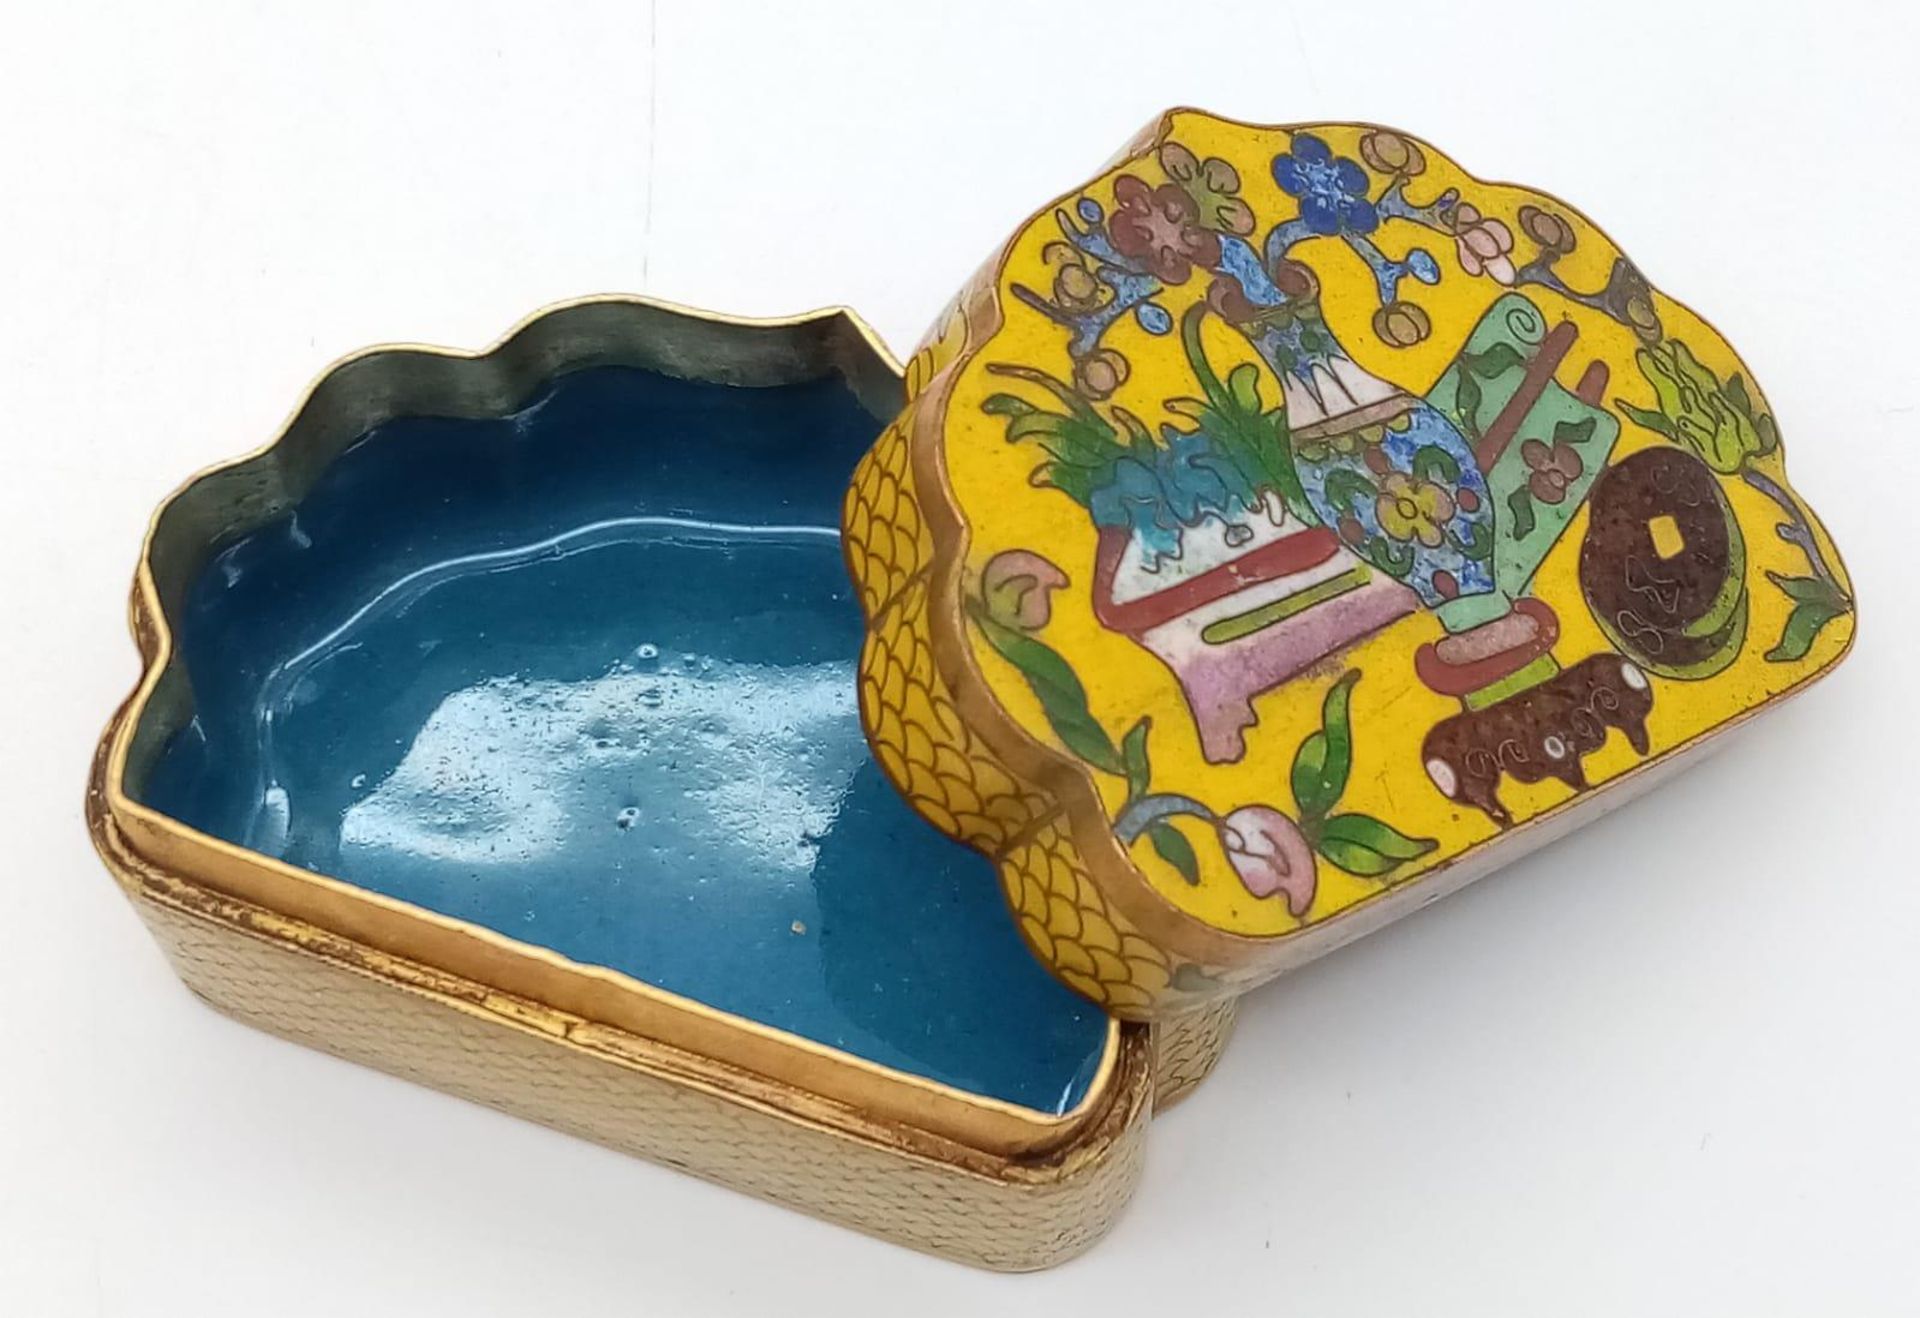 AN EXQUISITE EXAMPLE OF 19TH CENTURY CHINESE CLOISONNE WORK IN THE FORM OF A SMALL TRINKET BOX . - Image 6 of 6